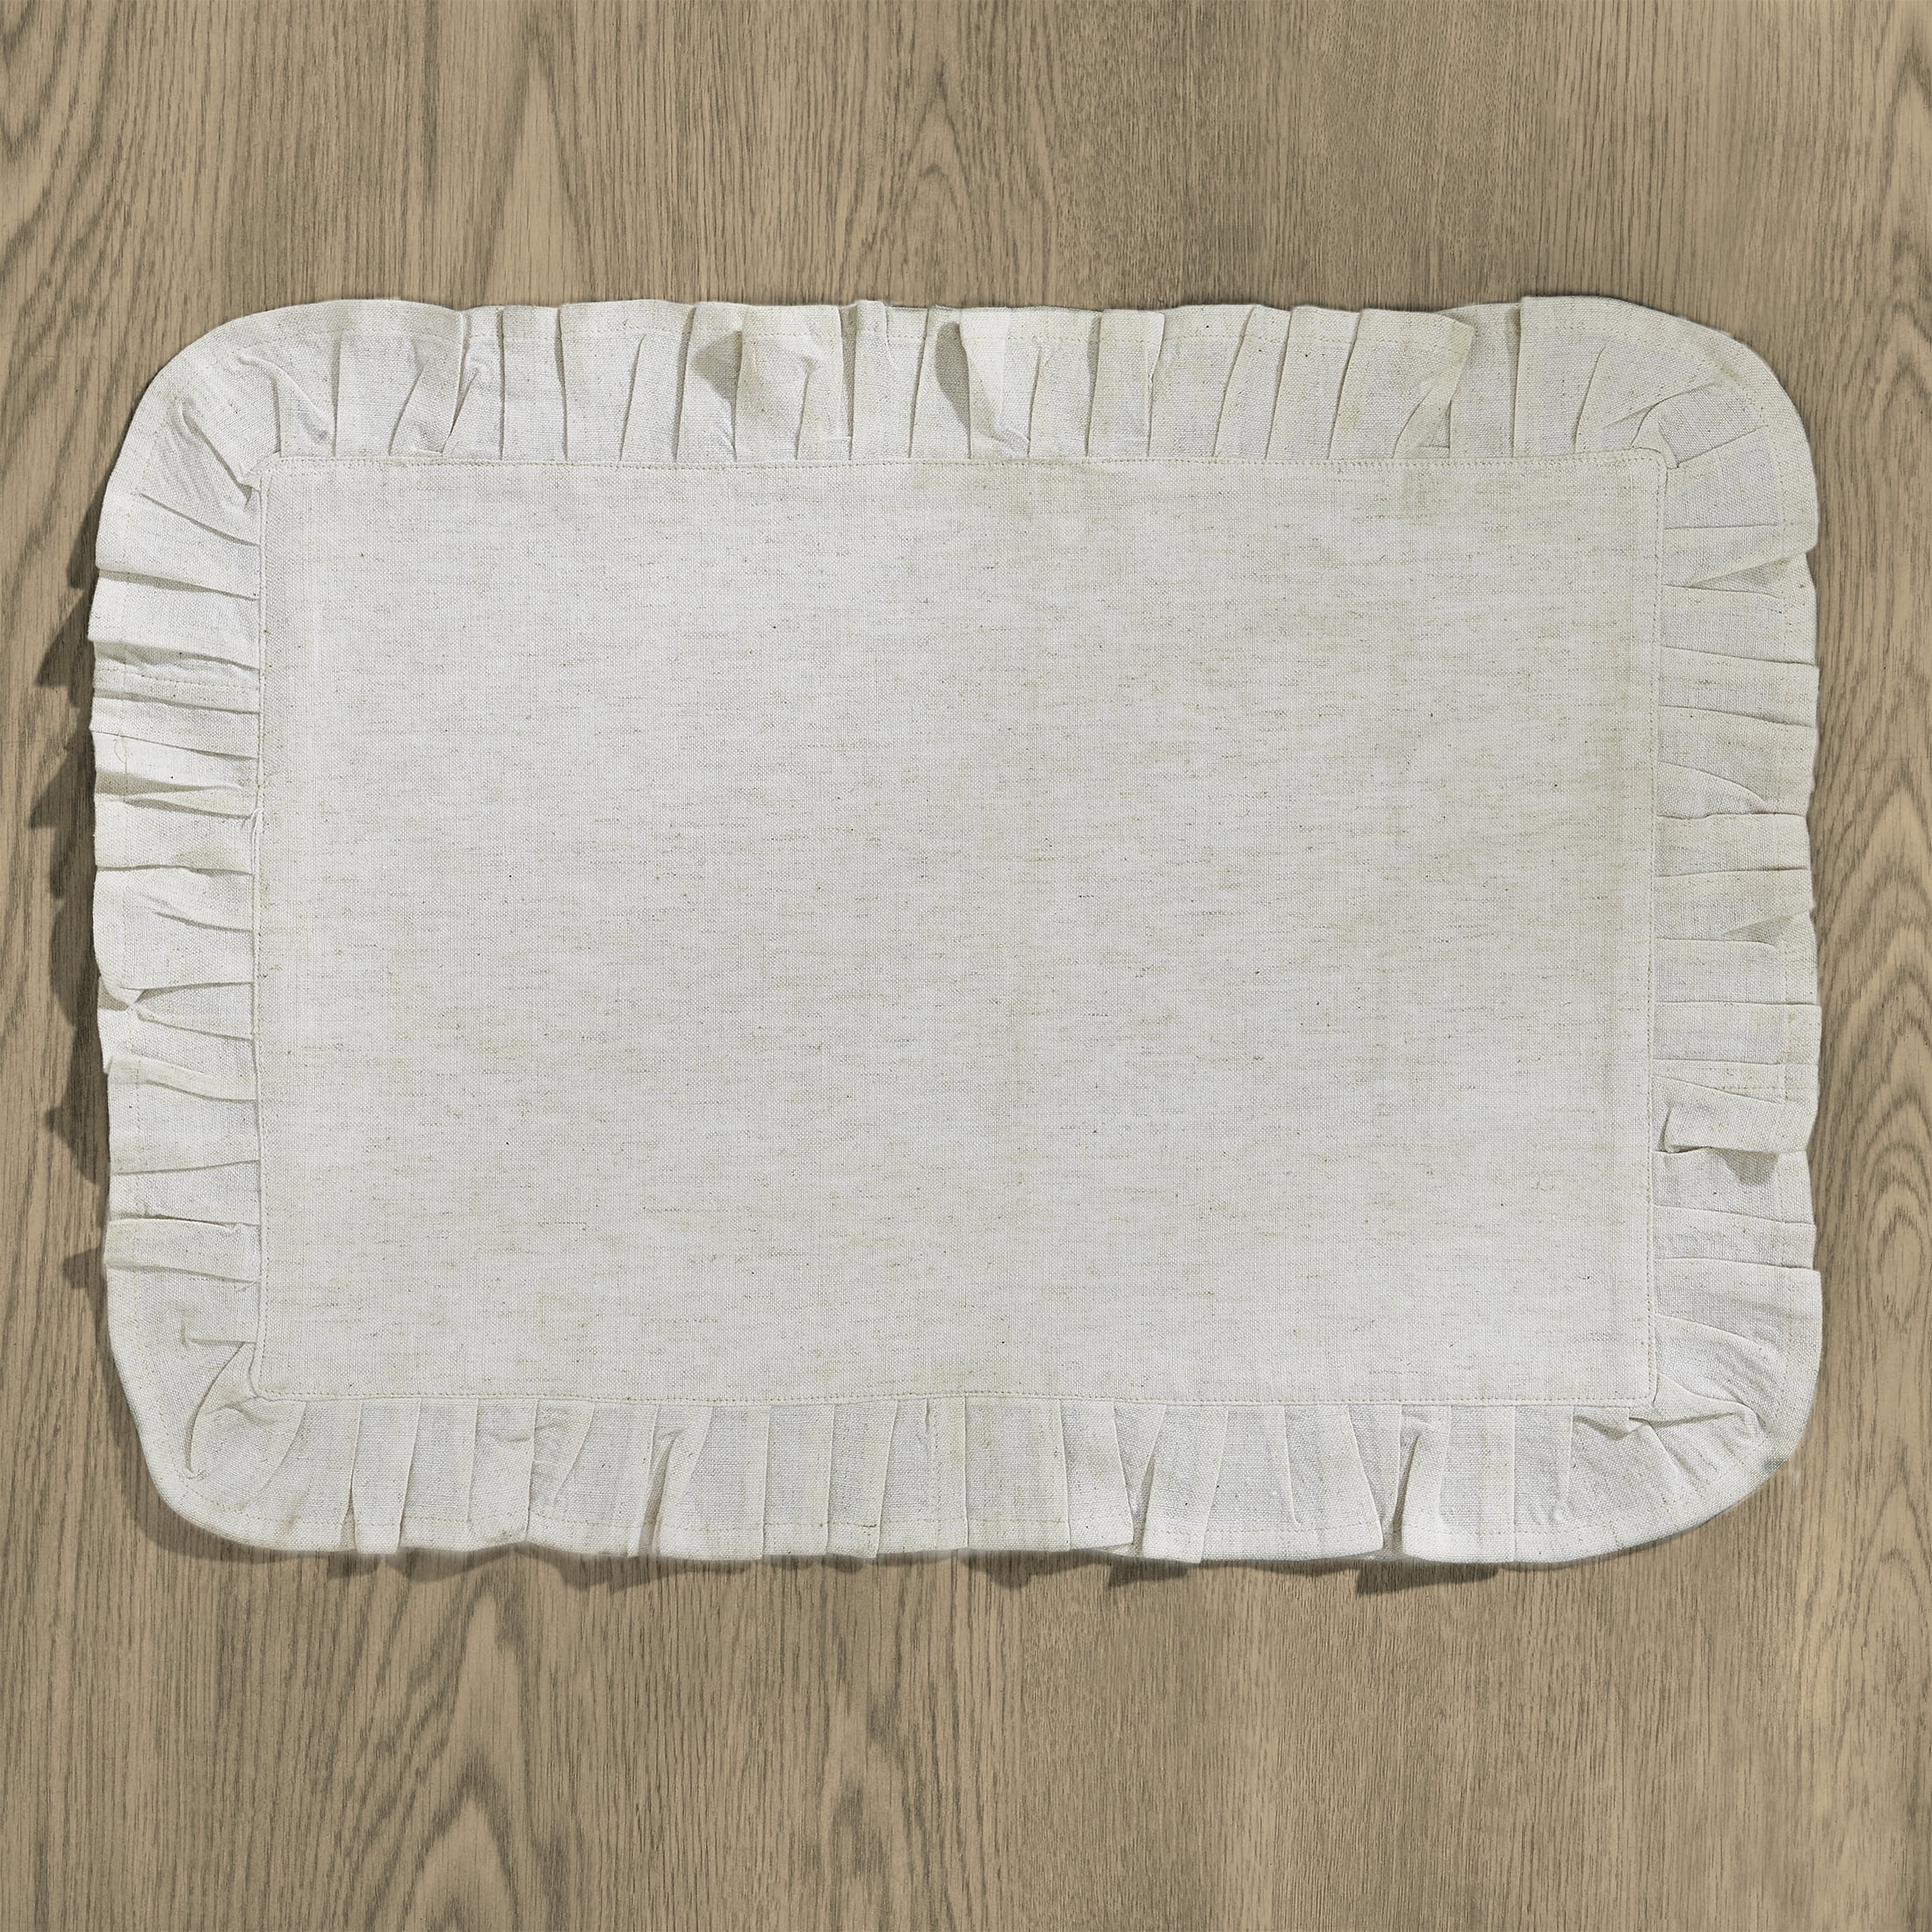 My Texas House Madelyn Ruffle 14" x 20" Table Placemat, Beige, 1 Piece